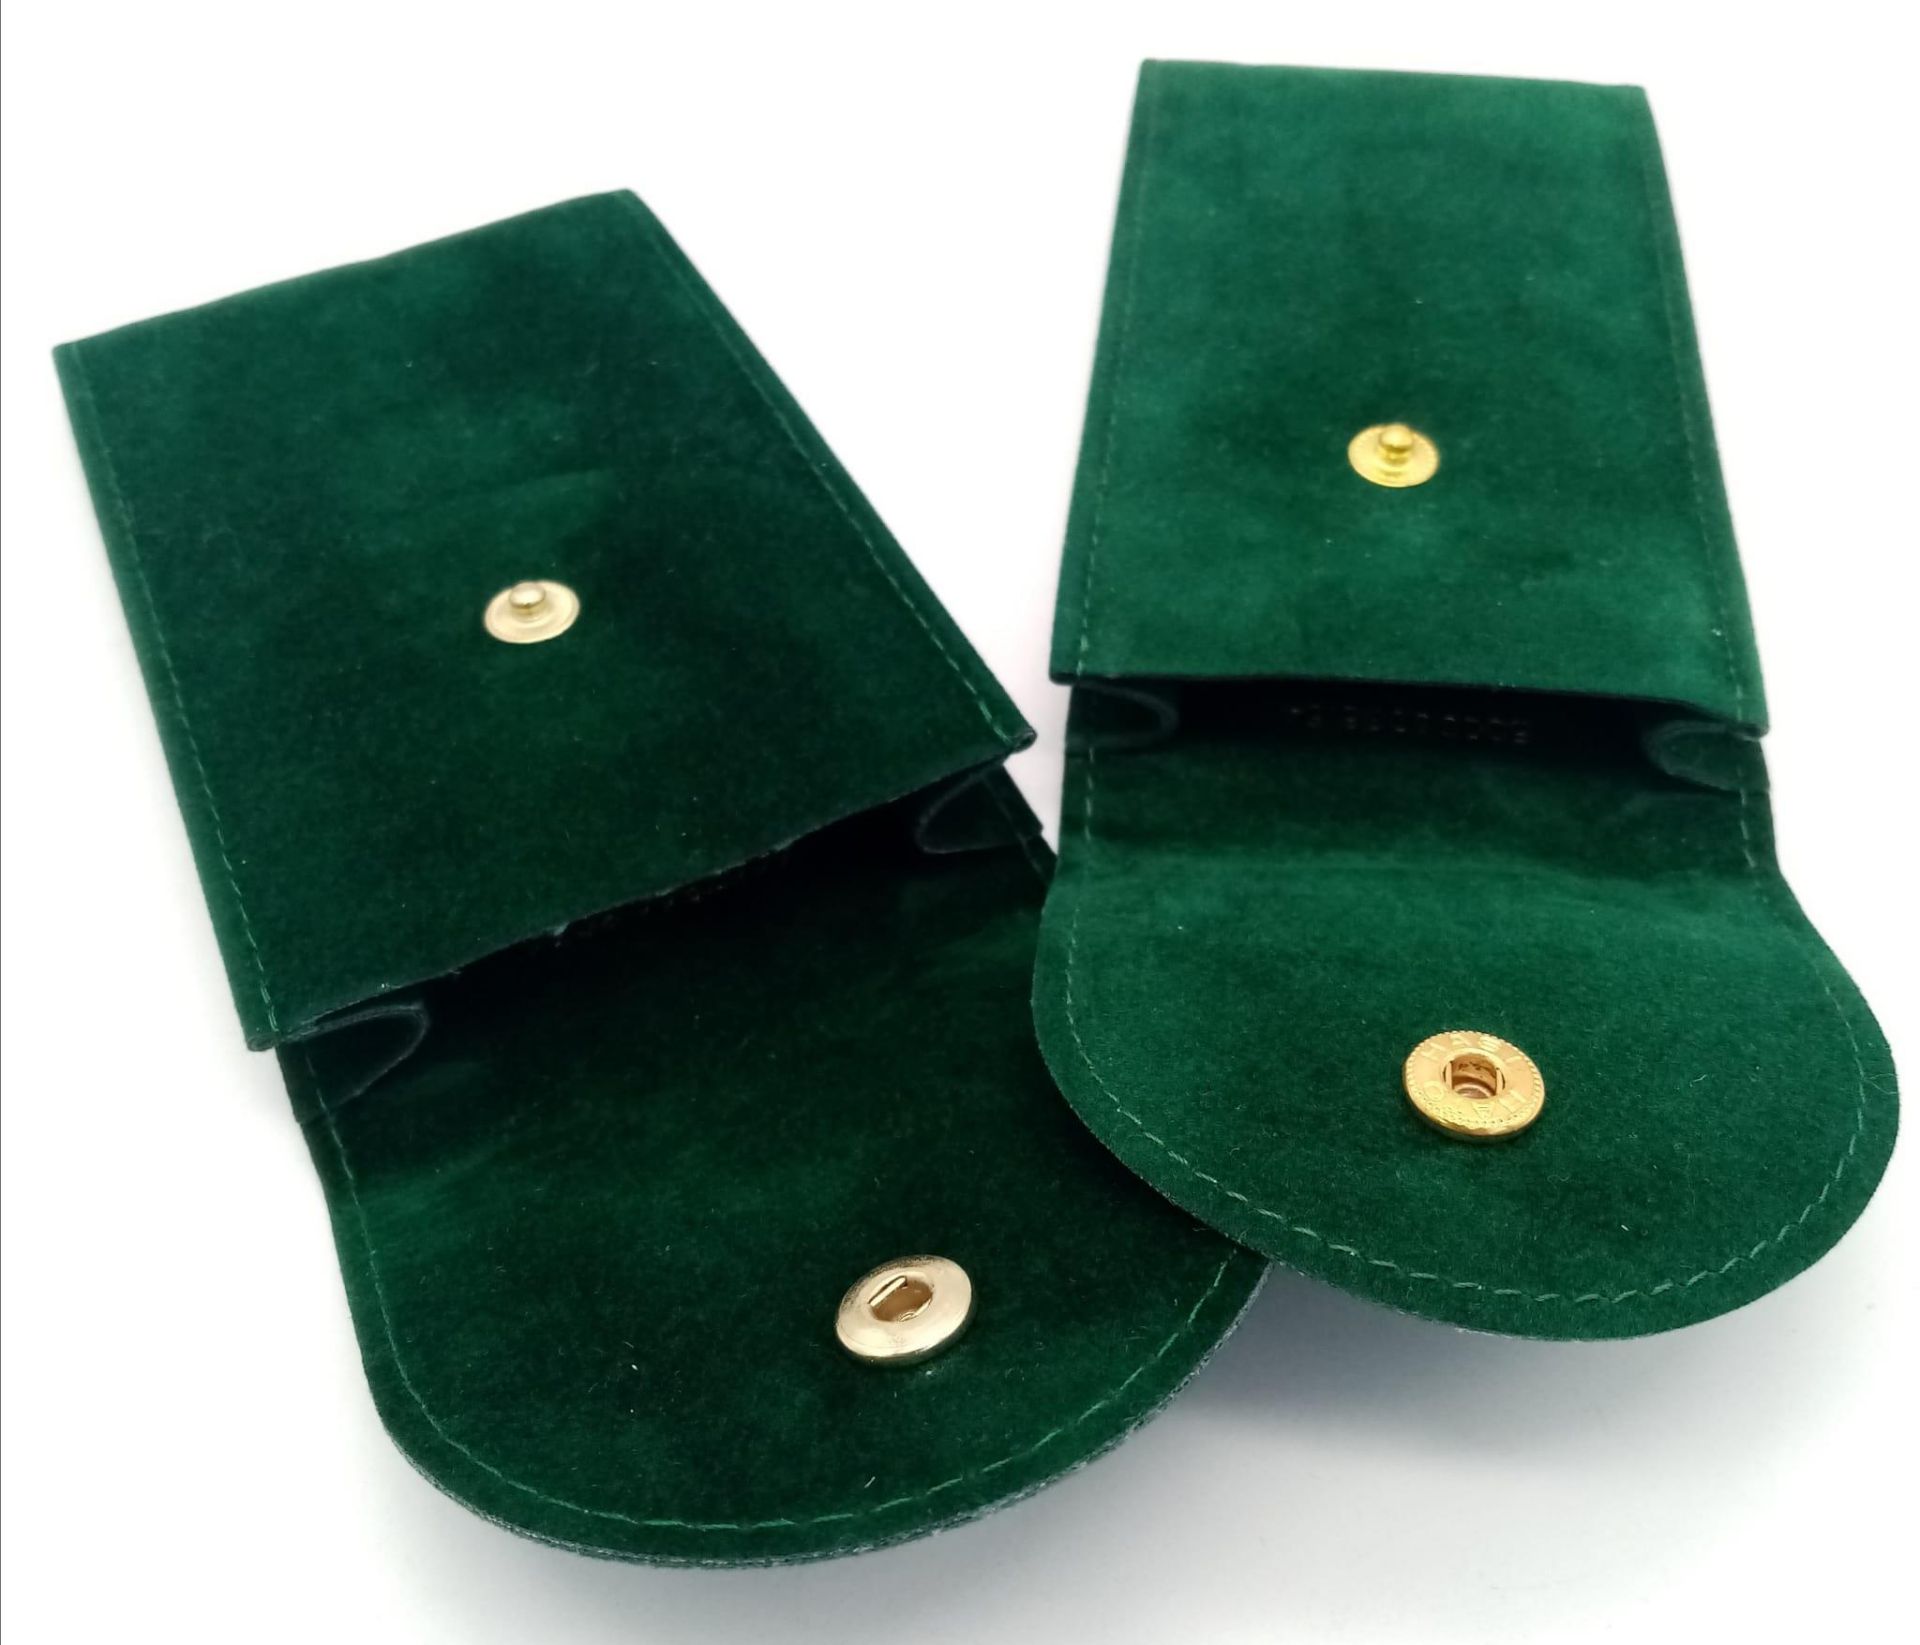 Two Different Sized Rolex Branded Travel Pouches. Soft green textile material. 12cm x 6cm and 11cm x - Bild 3 aus 9